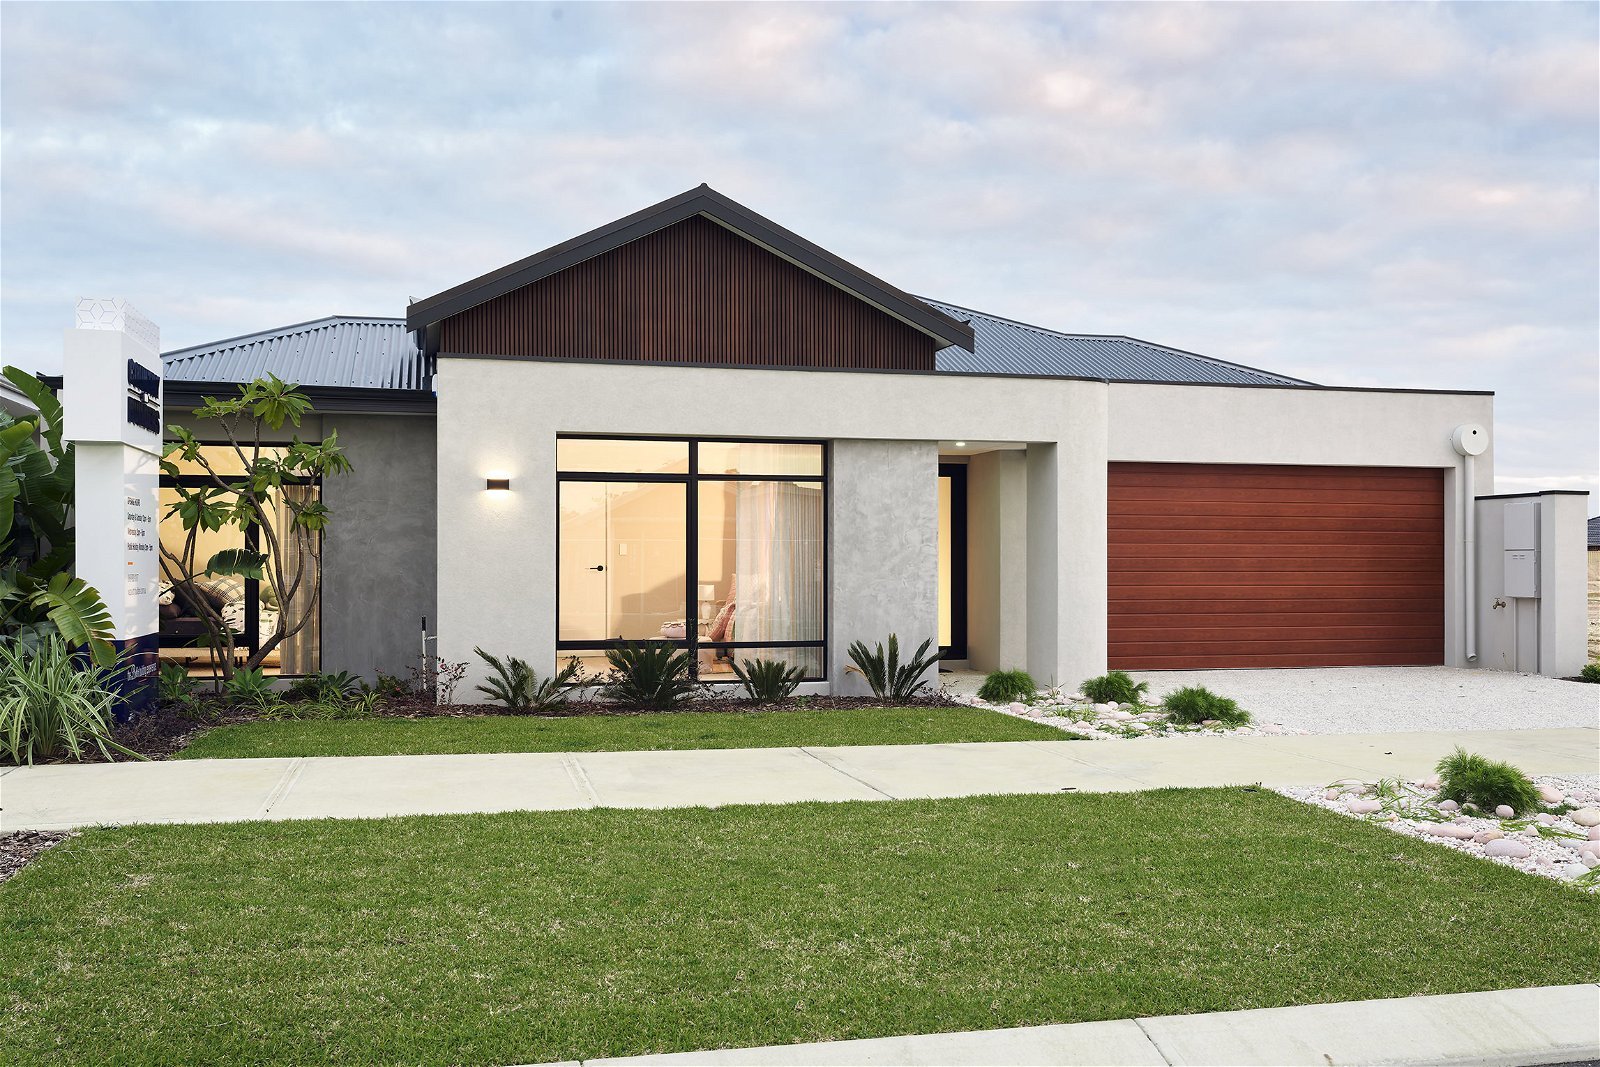 Wa Country Builders - The Tempo | Display - Gallery - Wa Country Builders Display Homes The Tempo Dalyellup 35